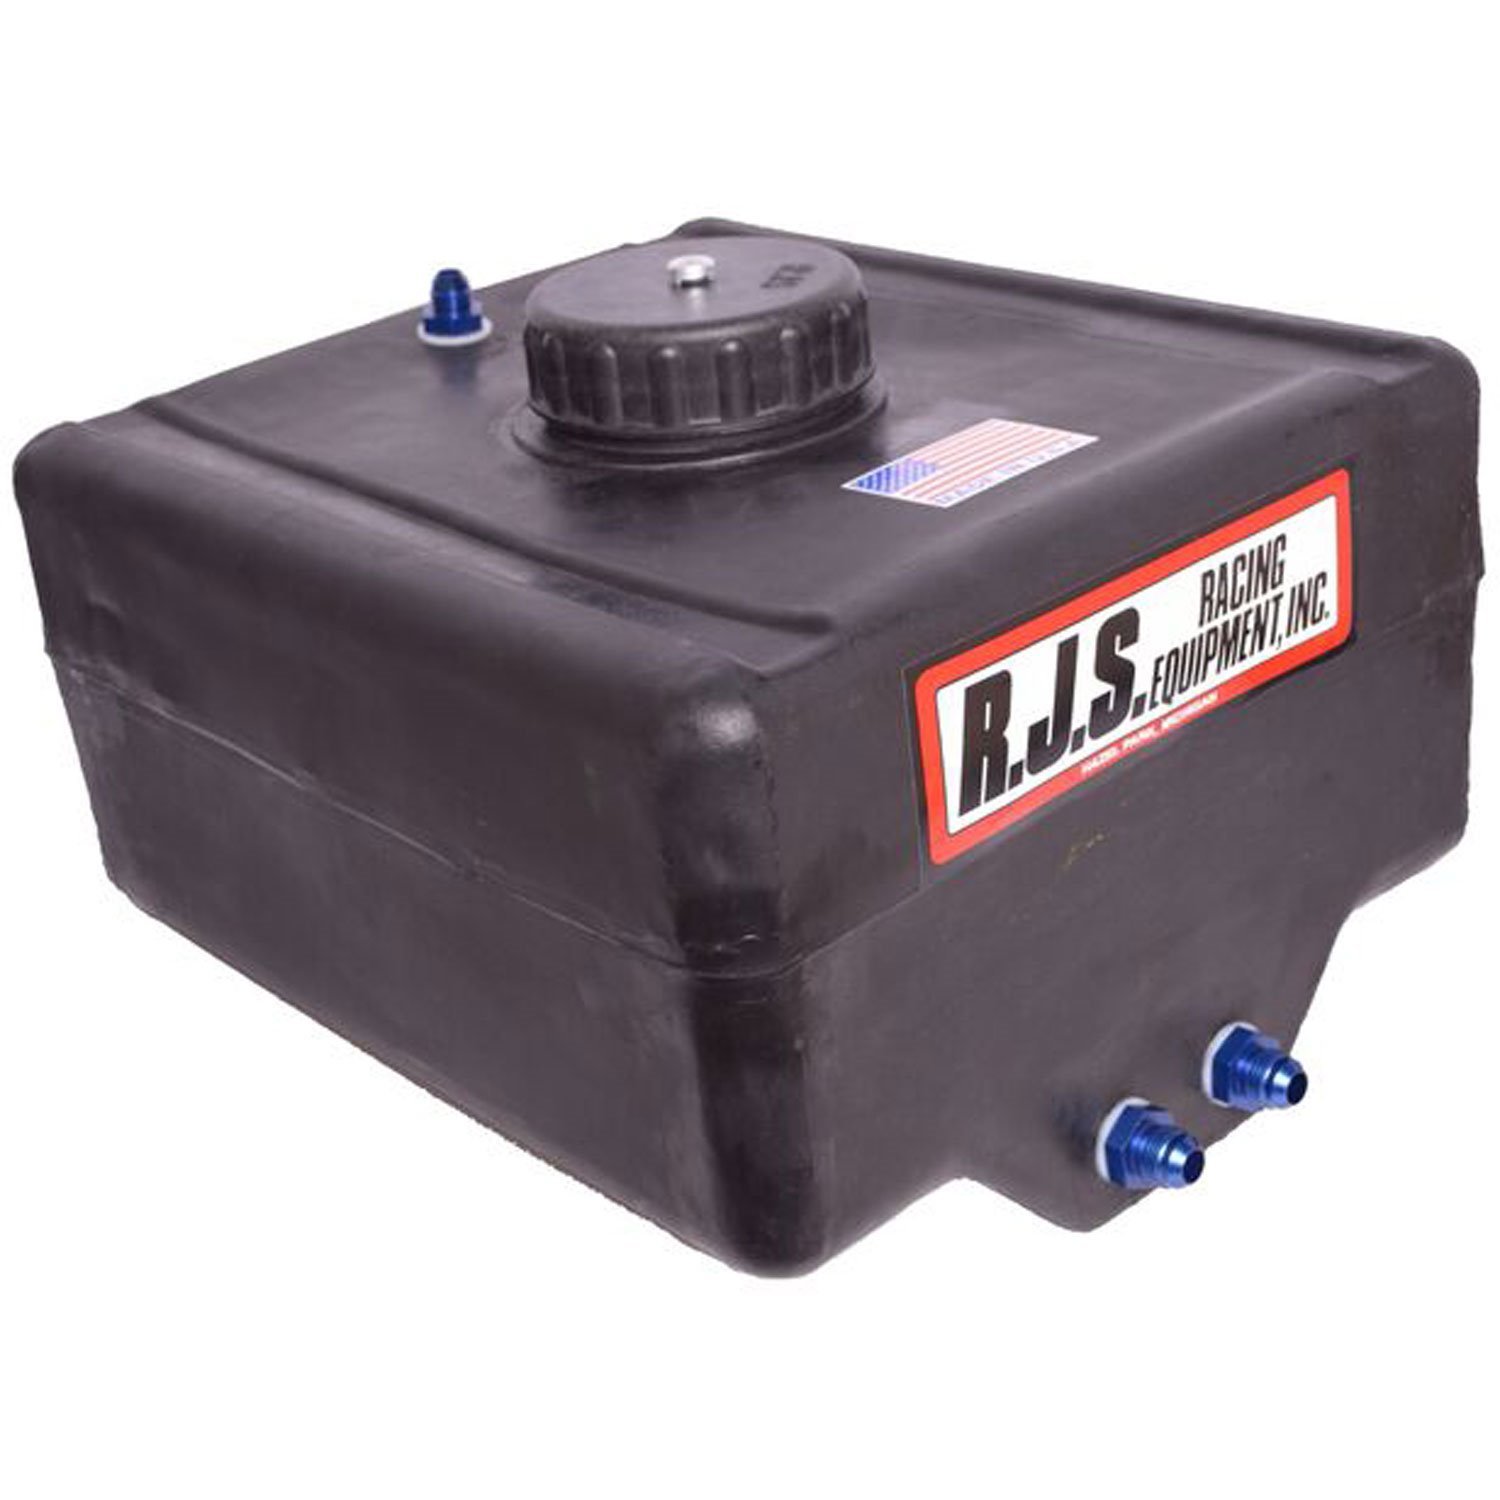 12 Gallon Drag Fuel Cell with Raised Plastic Filler Cap